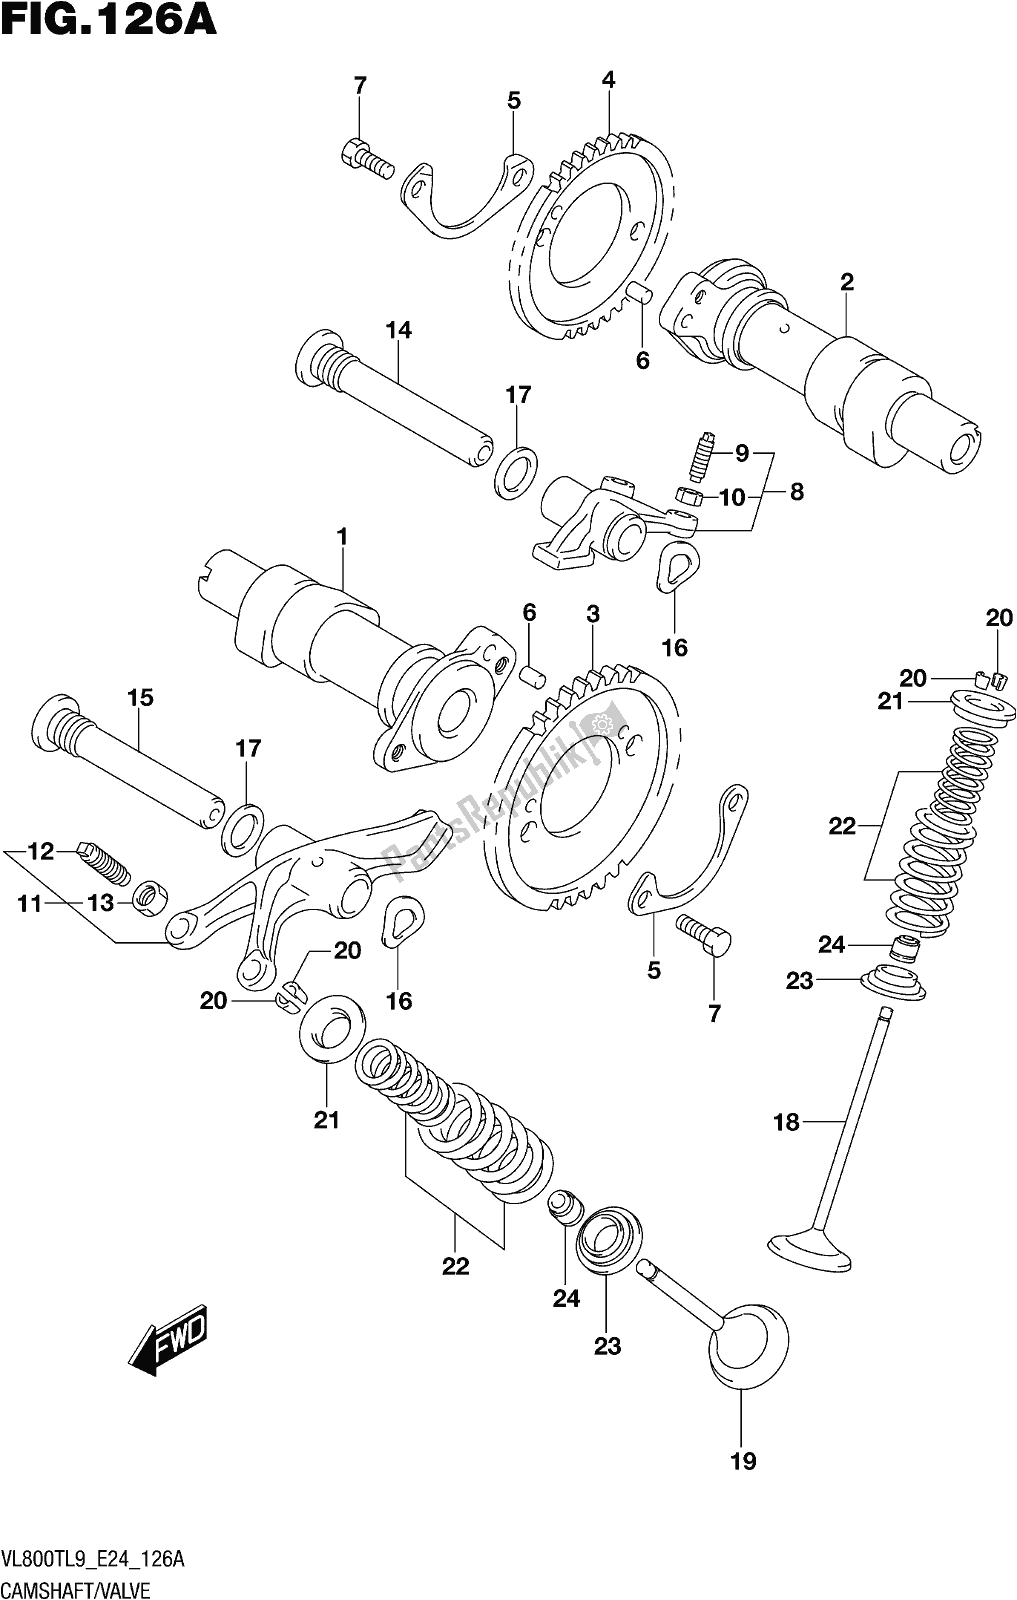 All parts for the Fig. 126a Camshaft/valve of the Suzuki VL 800T 2019